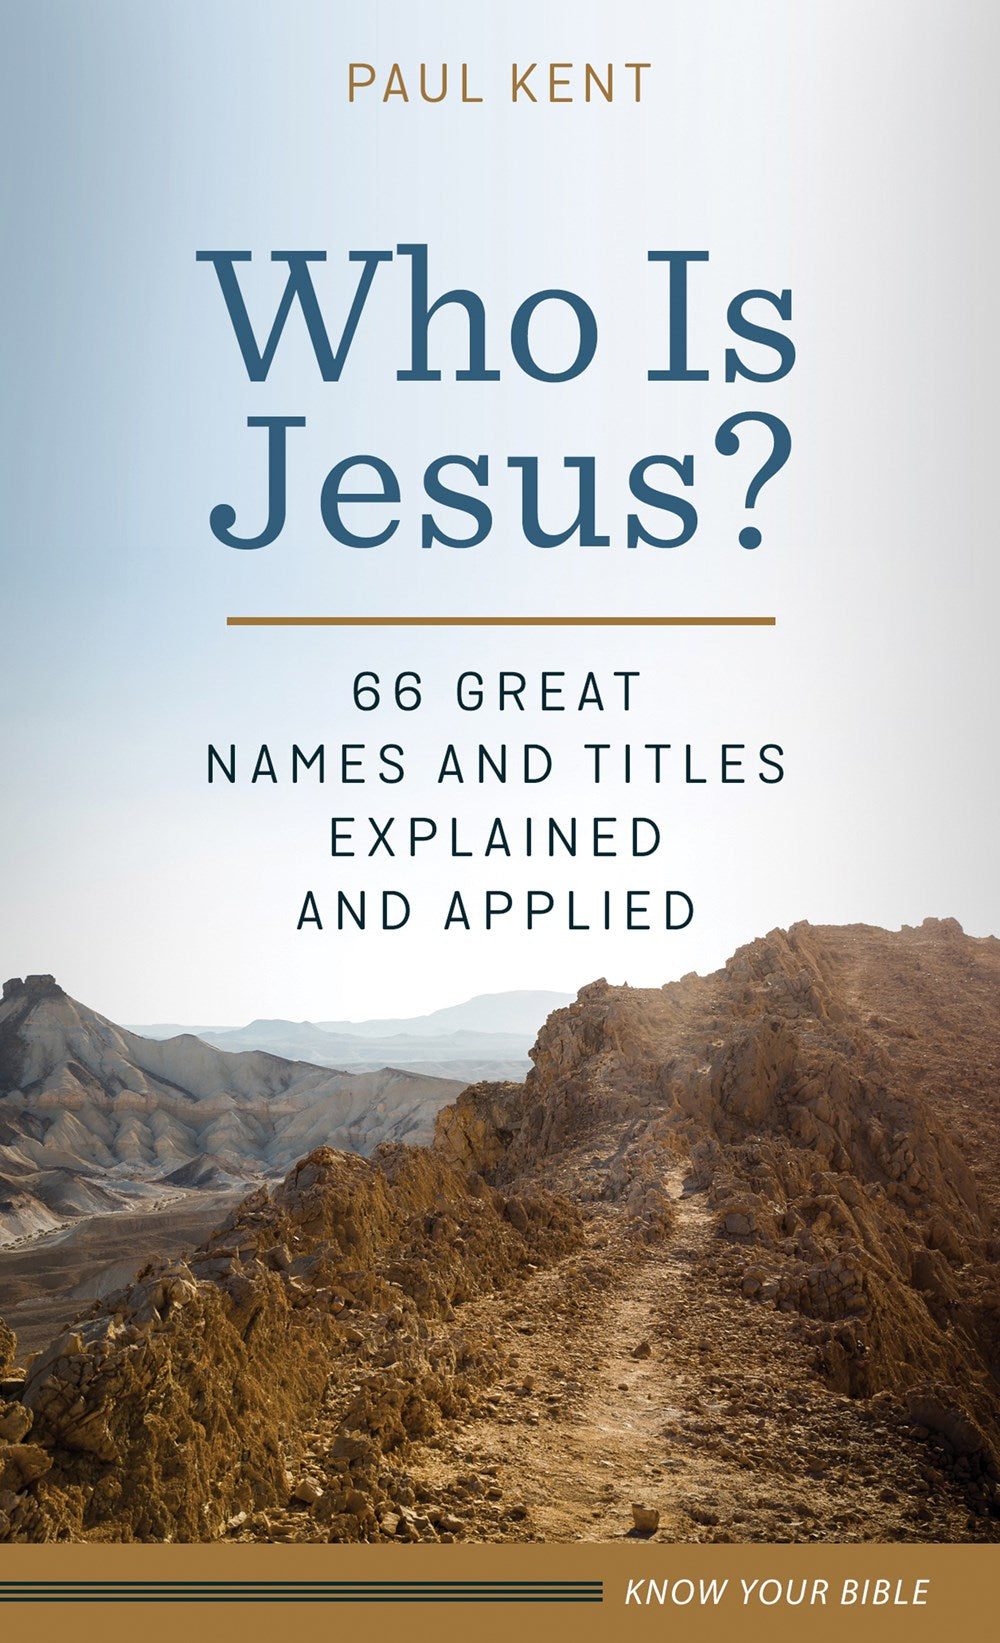 Who Is Jesus? - The Christian Gift Company